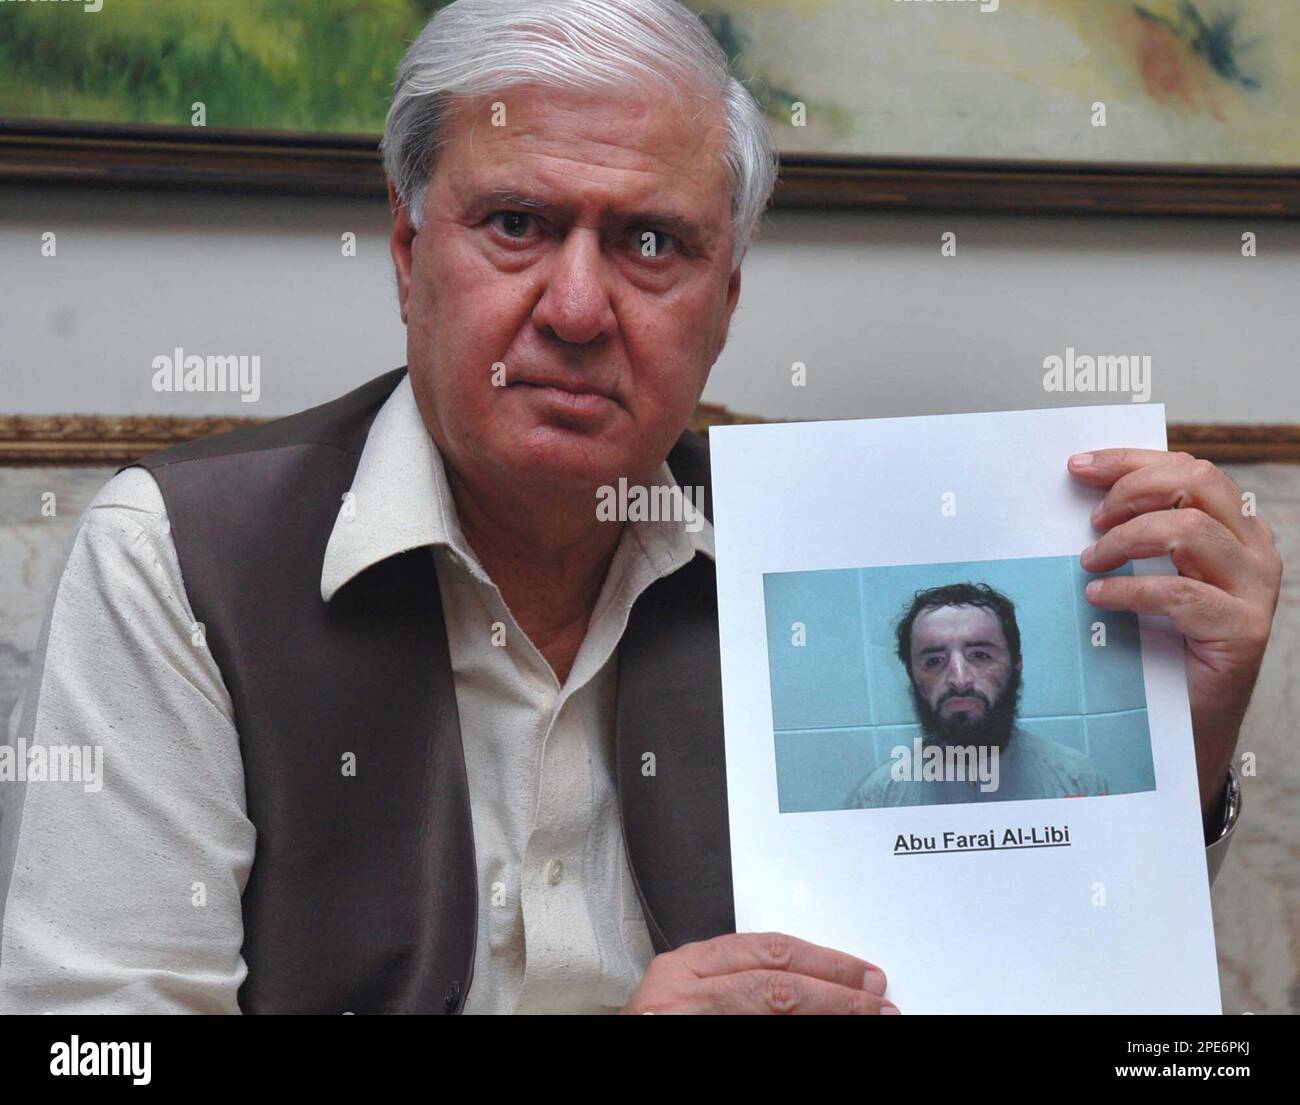 Pakistans Interior Ministry Aftab Khan Sherpao shows a picture of senior al-Qaida suspect Abu Faraj al-Libbi after his arrest, during a press conference in Islamabad, Pakistan on Wednesday, May 4, 2005. Libbi, wanted in two attempts to assassinate President Gen. Pervez Musharraf, has been arrested in Pakistan, after a fierce gunbattle, the government said Wednesday, May 4, 2005. (AP Photo/Anjum Naveed) Stock Photo